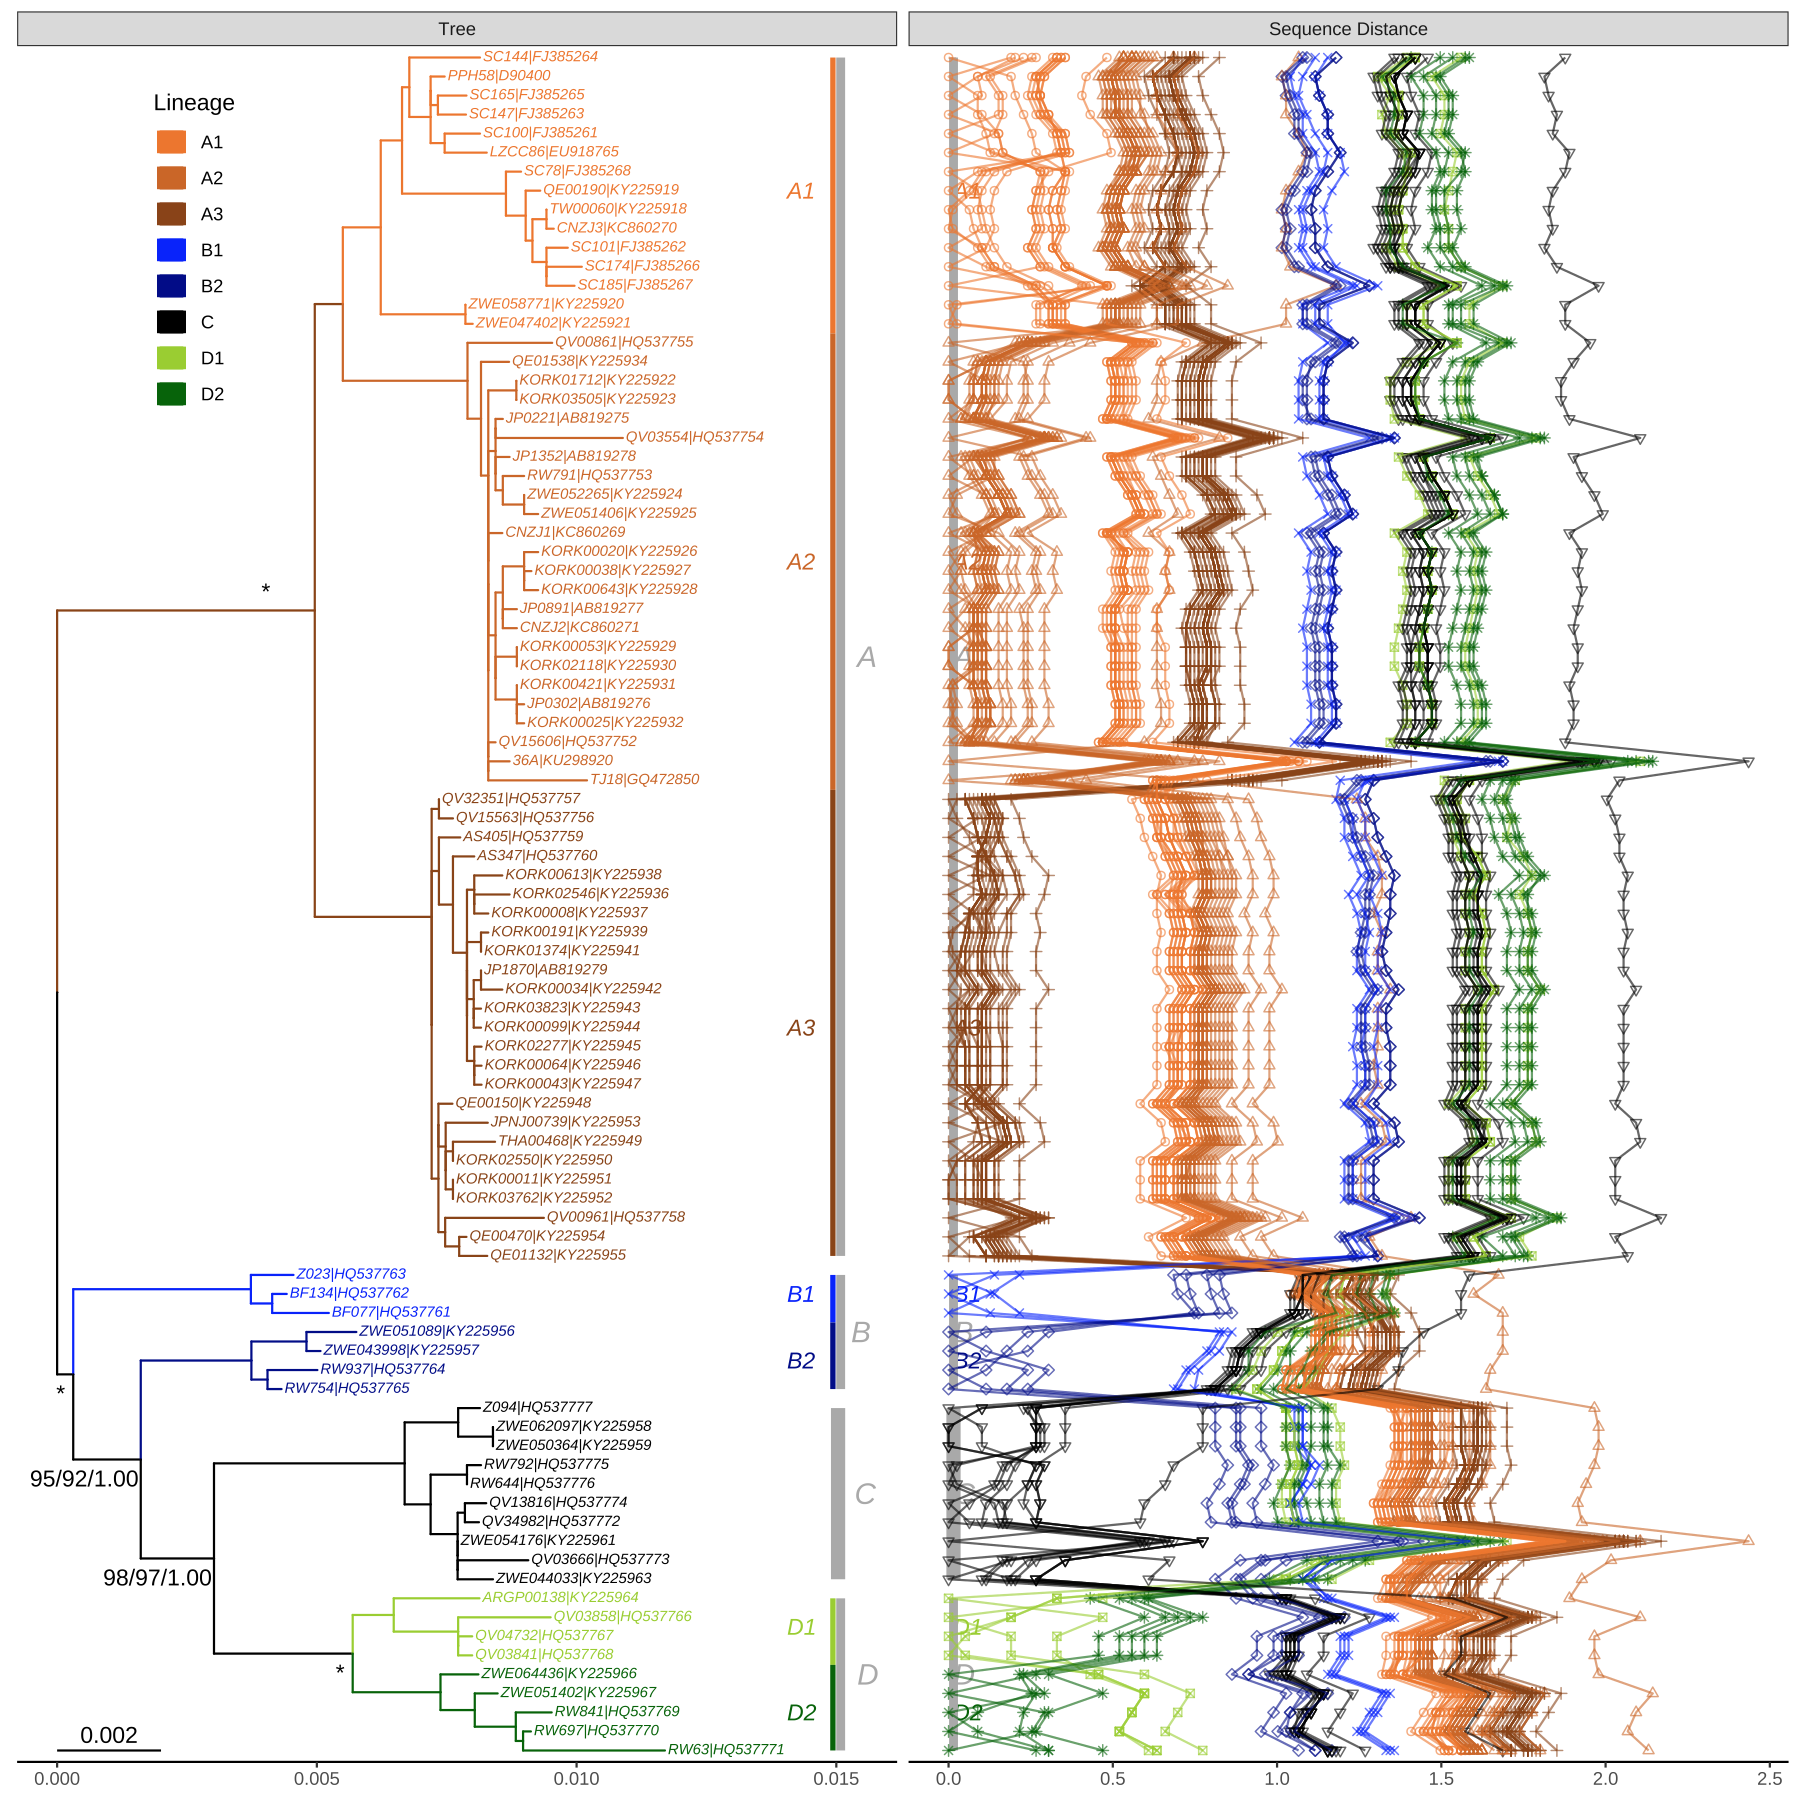 Phylogeny of HPV58 complete genomes with dot and line plots of pairwise nucleotide sequence distances.